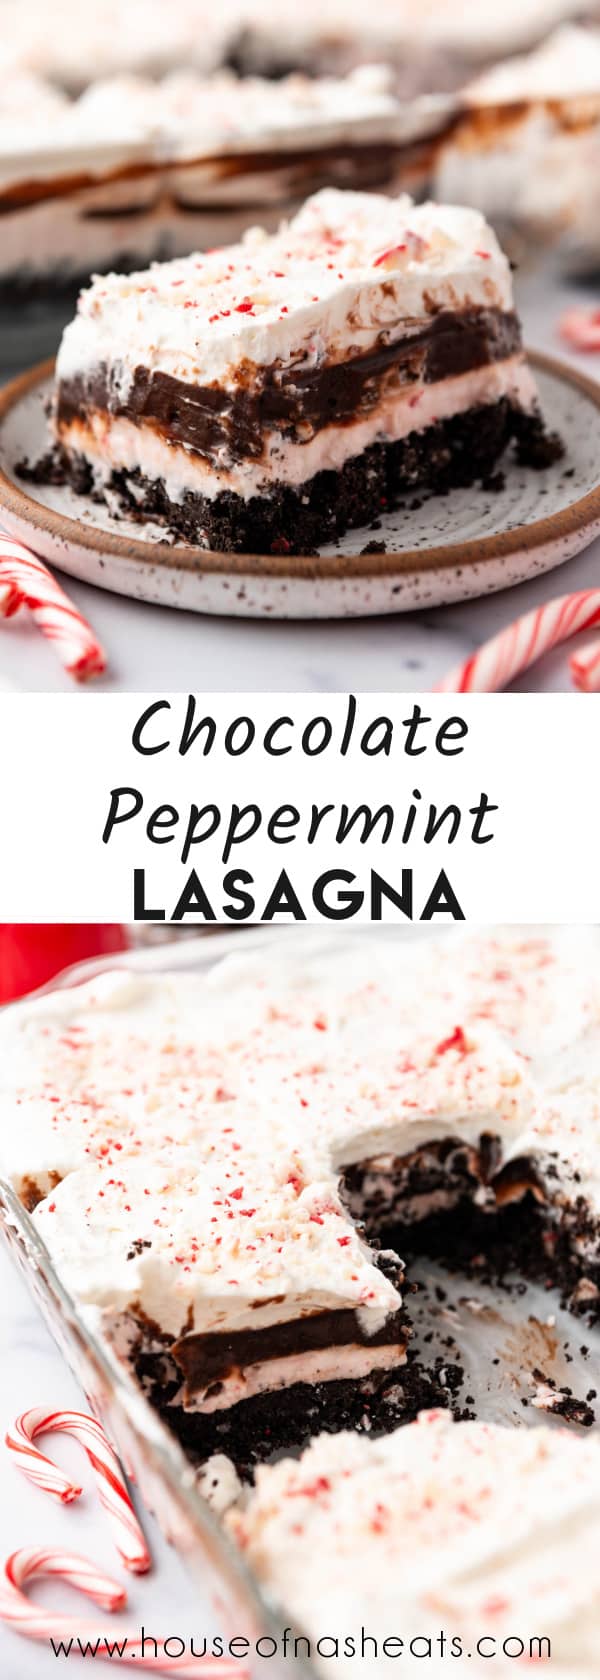 A collage of images of chocolate peppermint lasagna with text overlay.